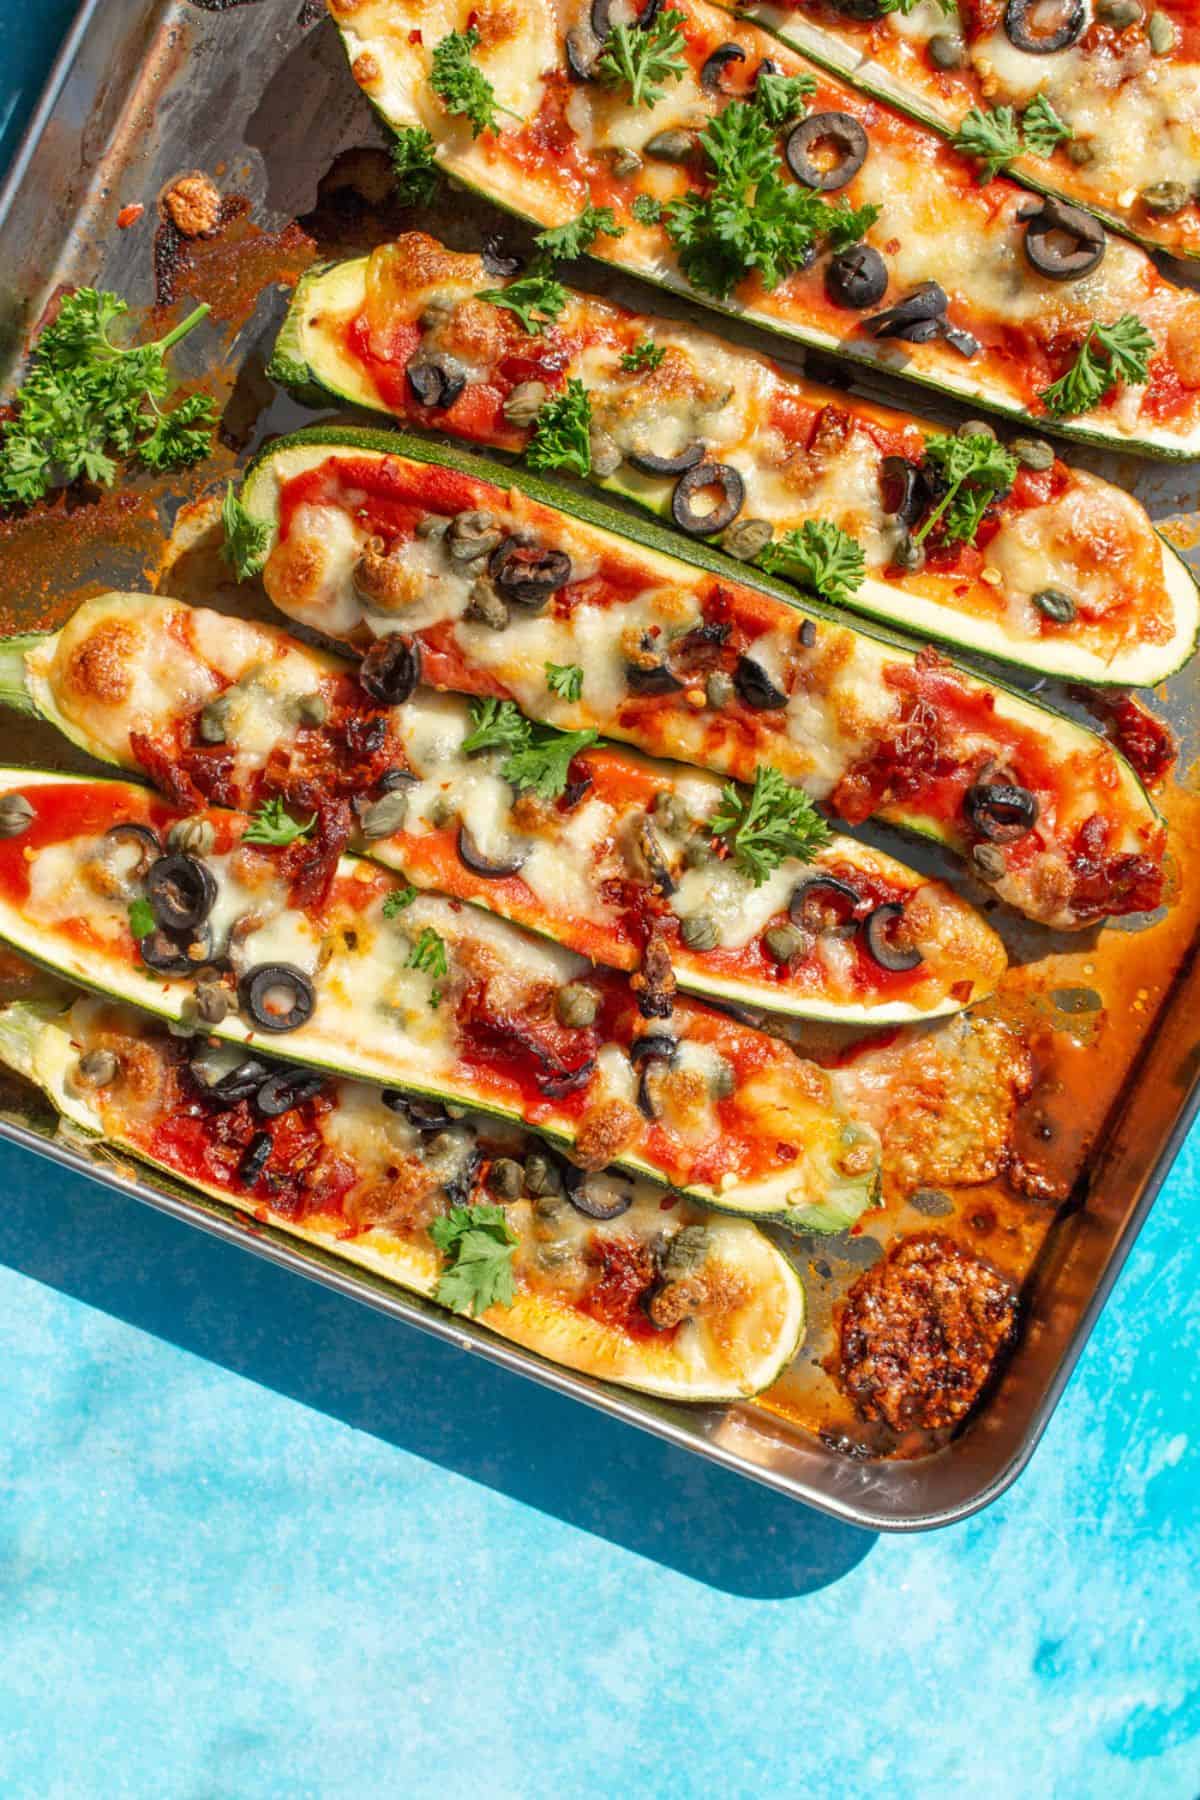 Courgette halves on a baking tray with golden brown cheese topping , sliced black olives and fresh parsley on a blue background.